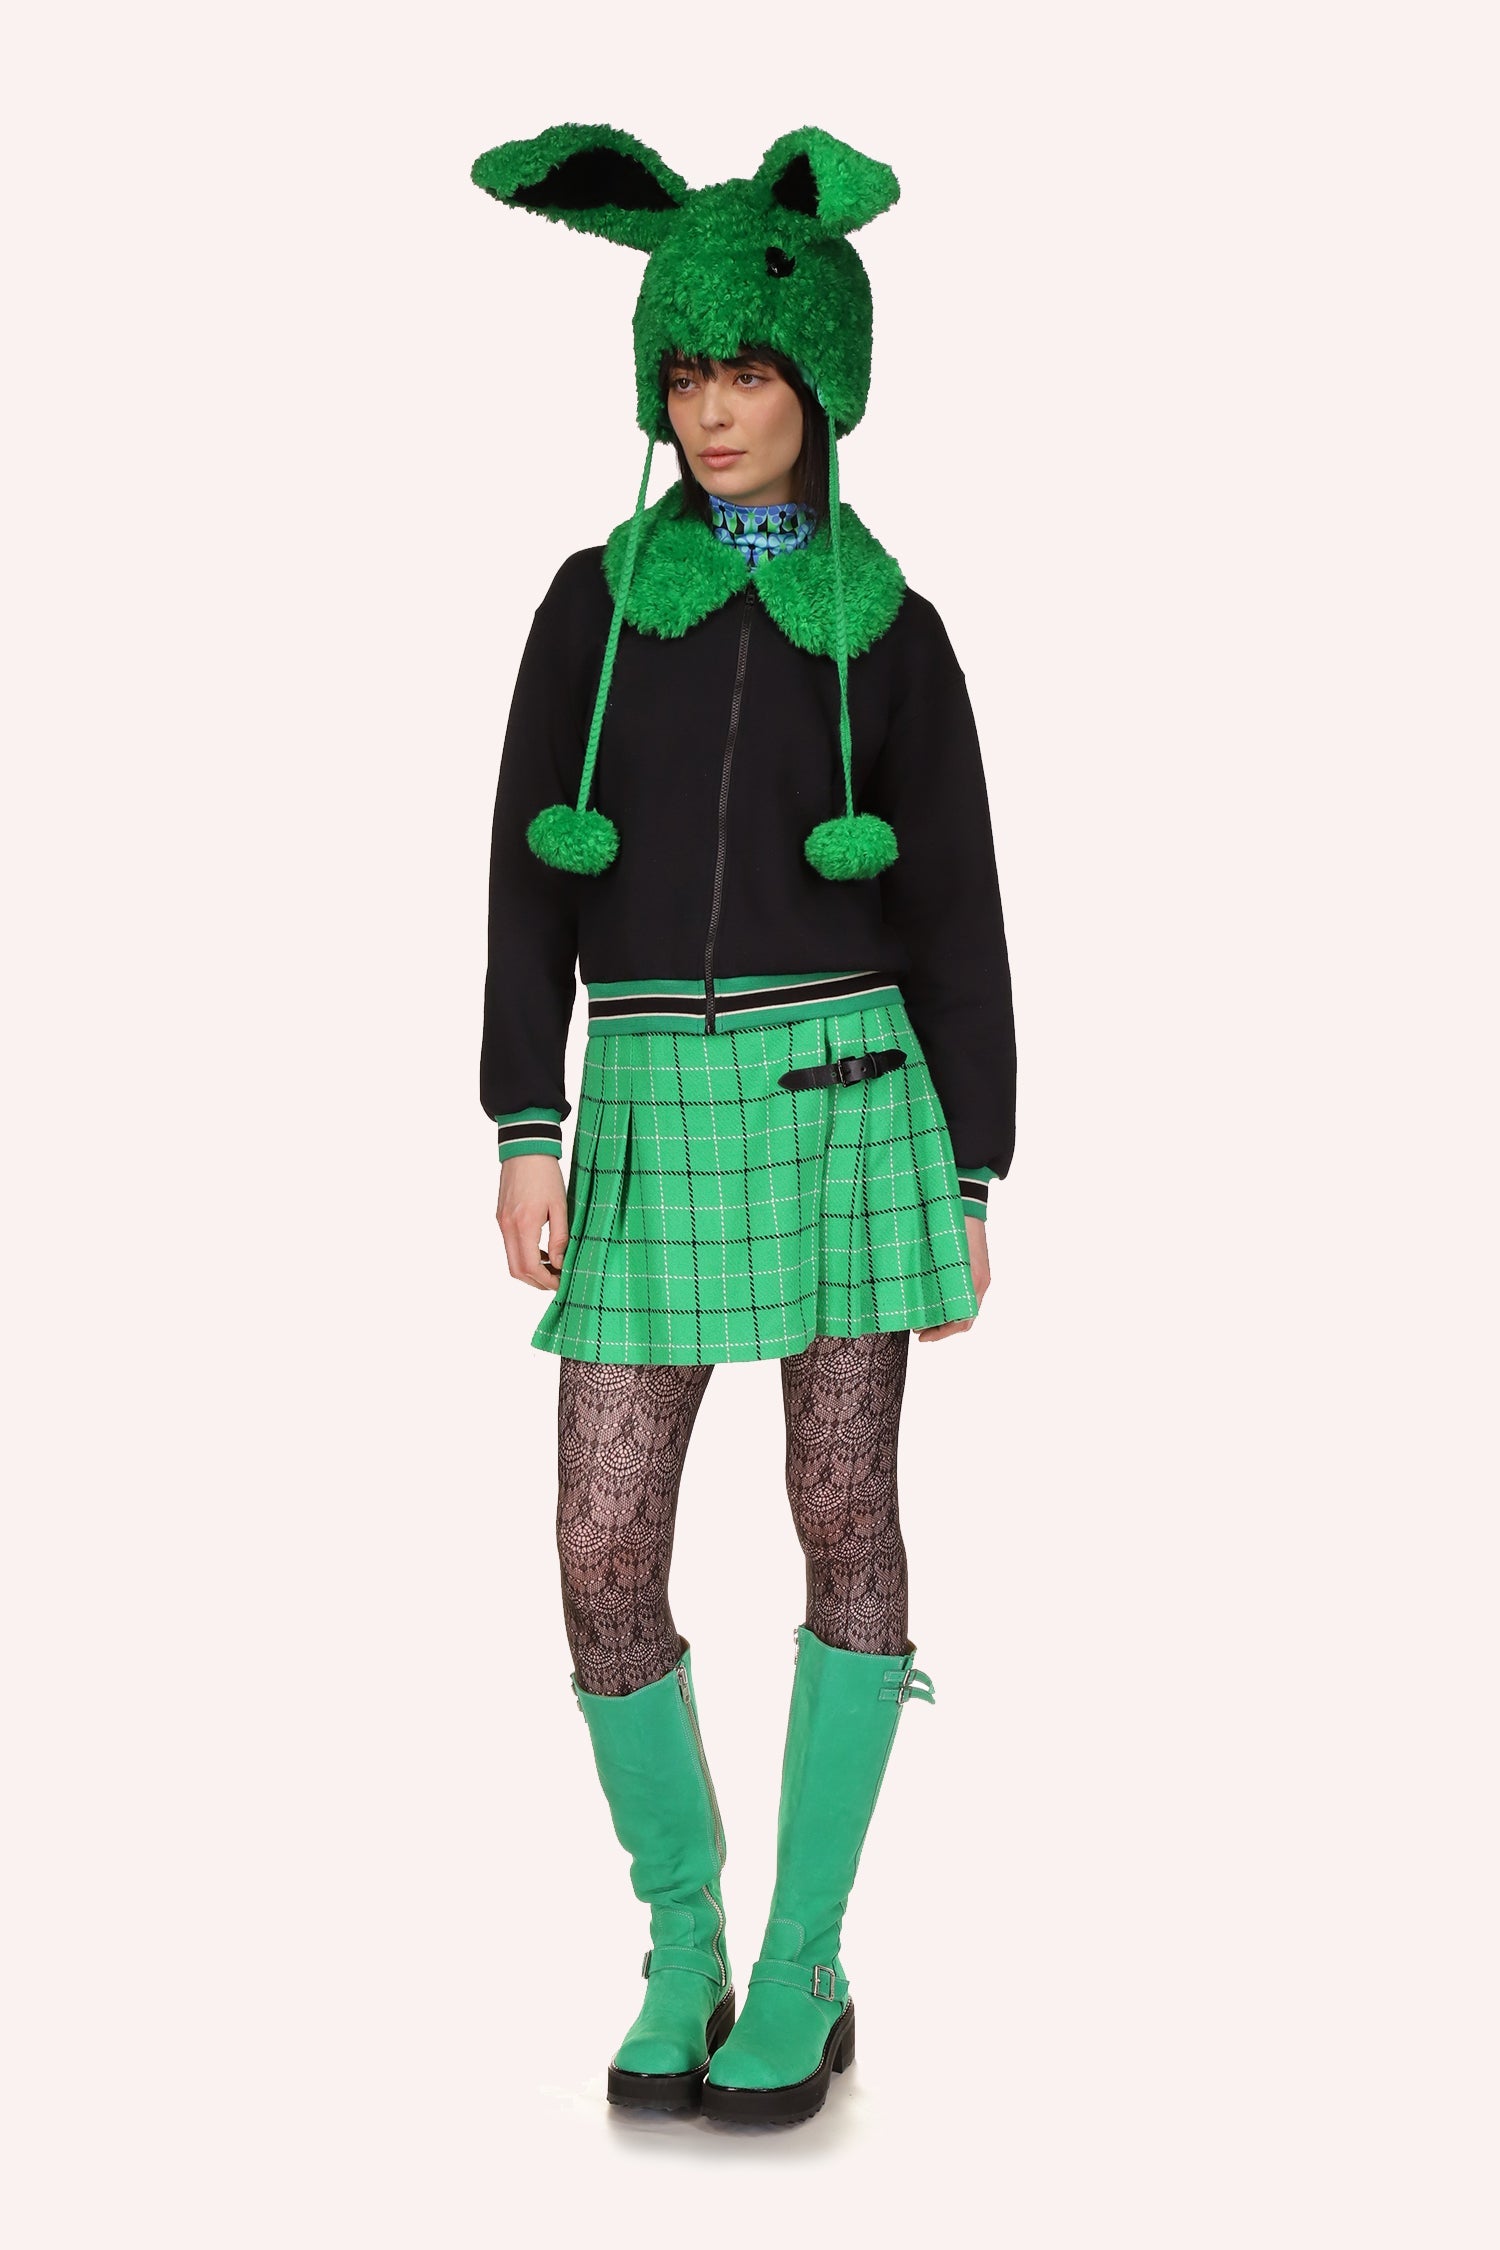 Dark Plush Sweatshirt Clover with an Irish green large collar, front zipper, long sleeves with green ornament at the hand